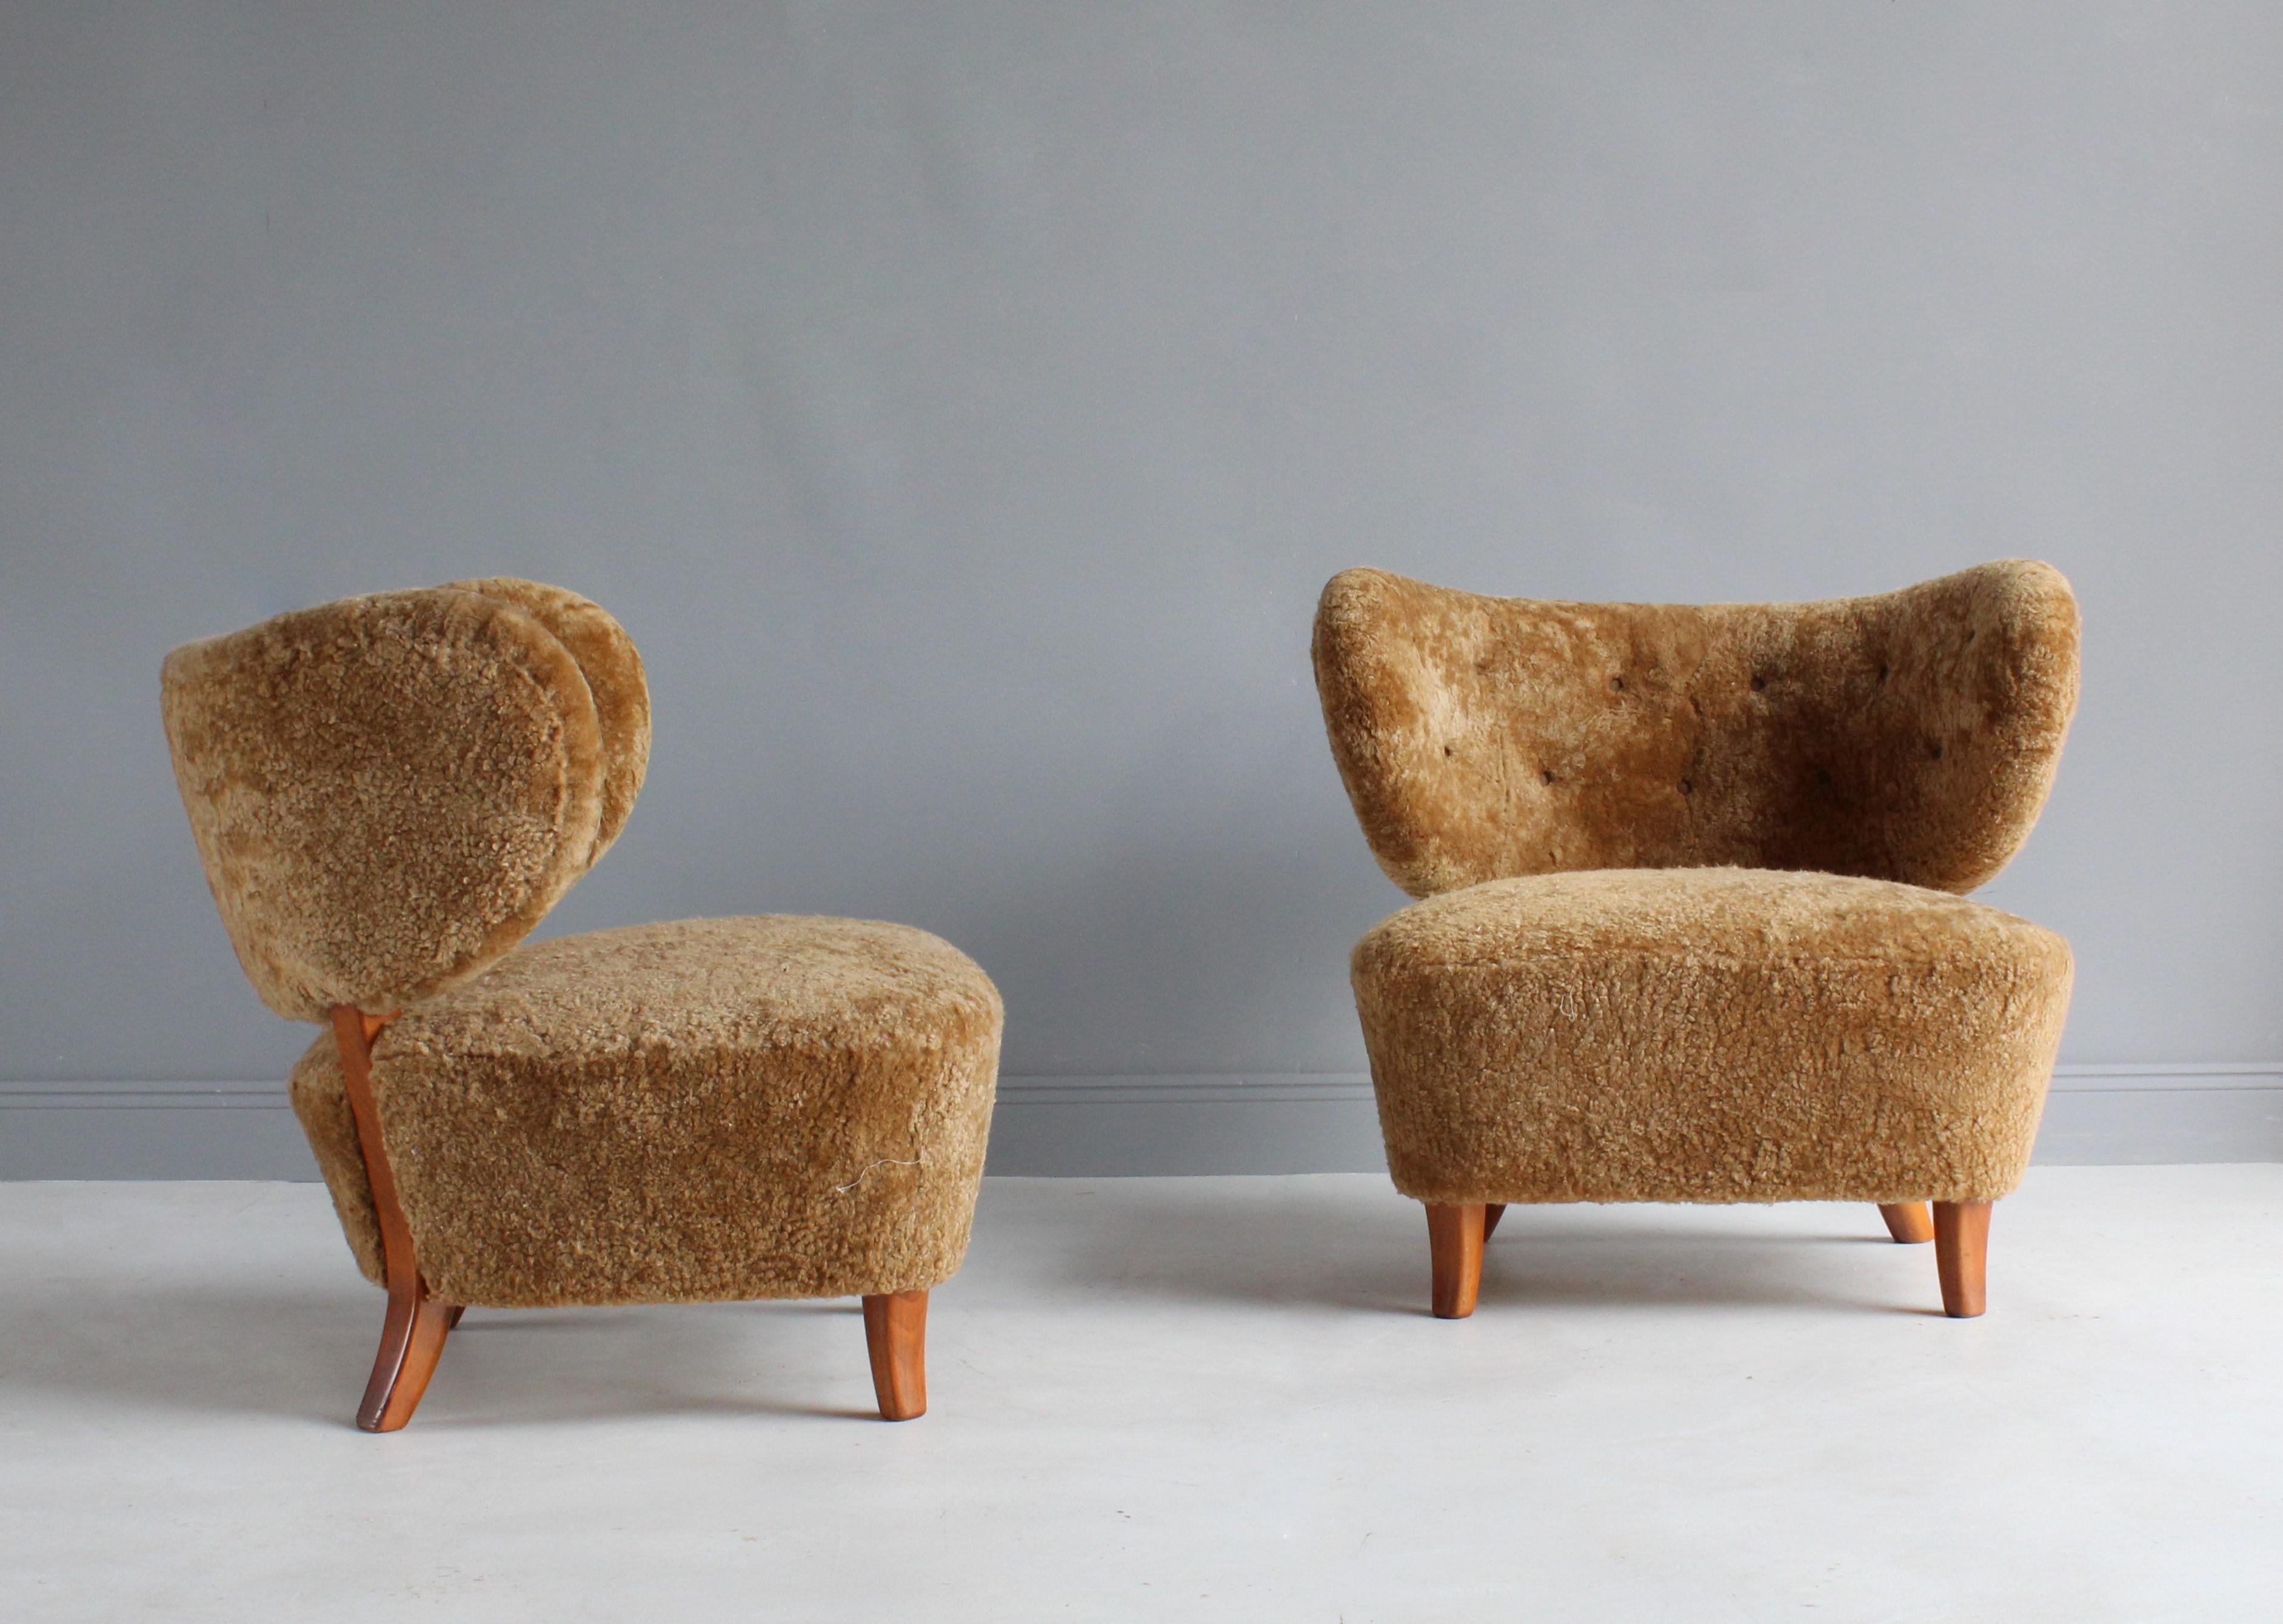 A pair of organic lounge chairs / slipper chairs attributed to Otto Schulz, presumably manufactured by Boet, Sweden.  

Other designers working in the organic style include Flemming Lassen, Philip Arctander, Gio Ponti, and Jean Royère.

 